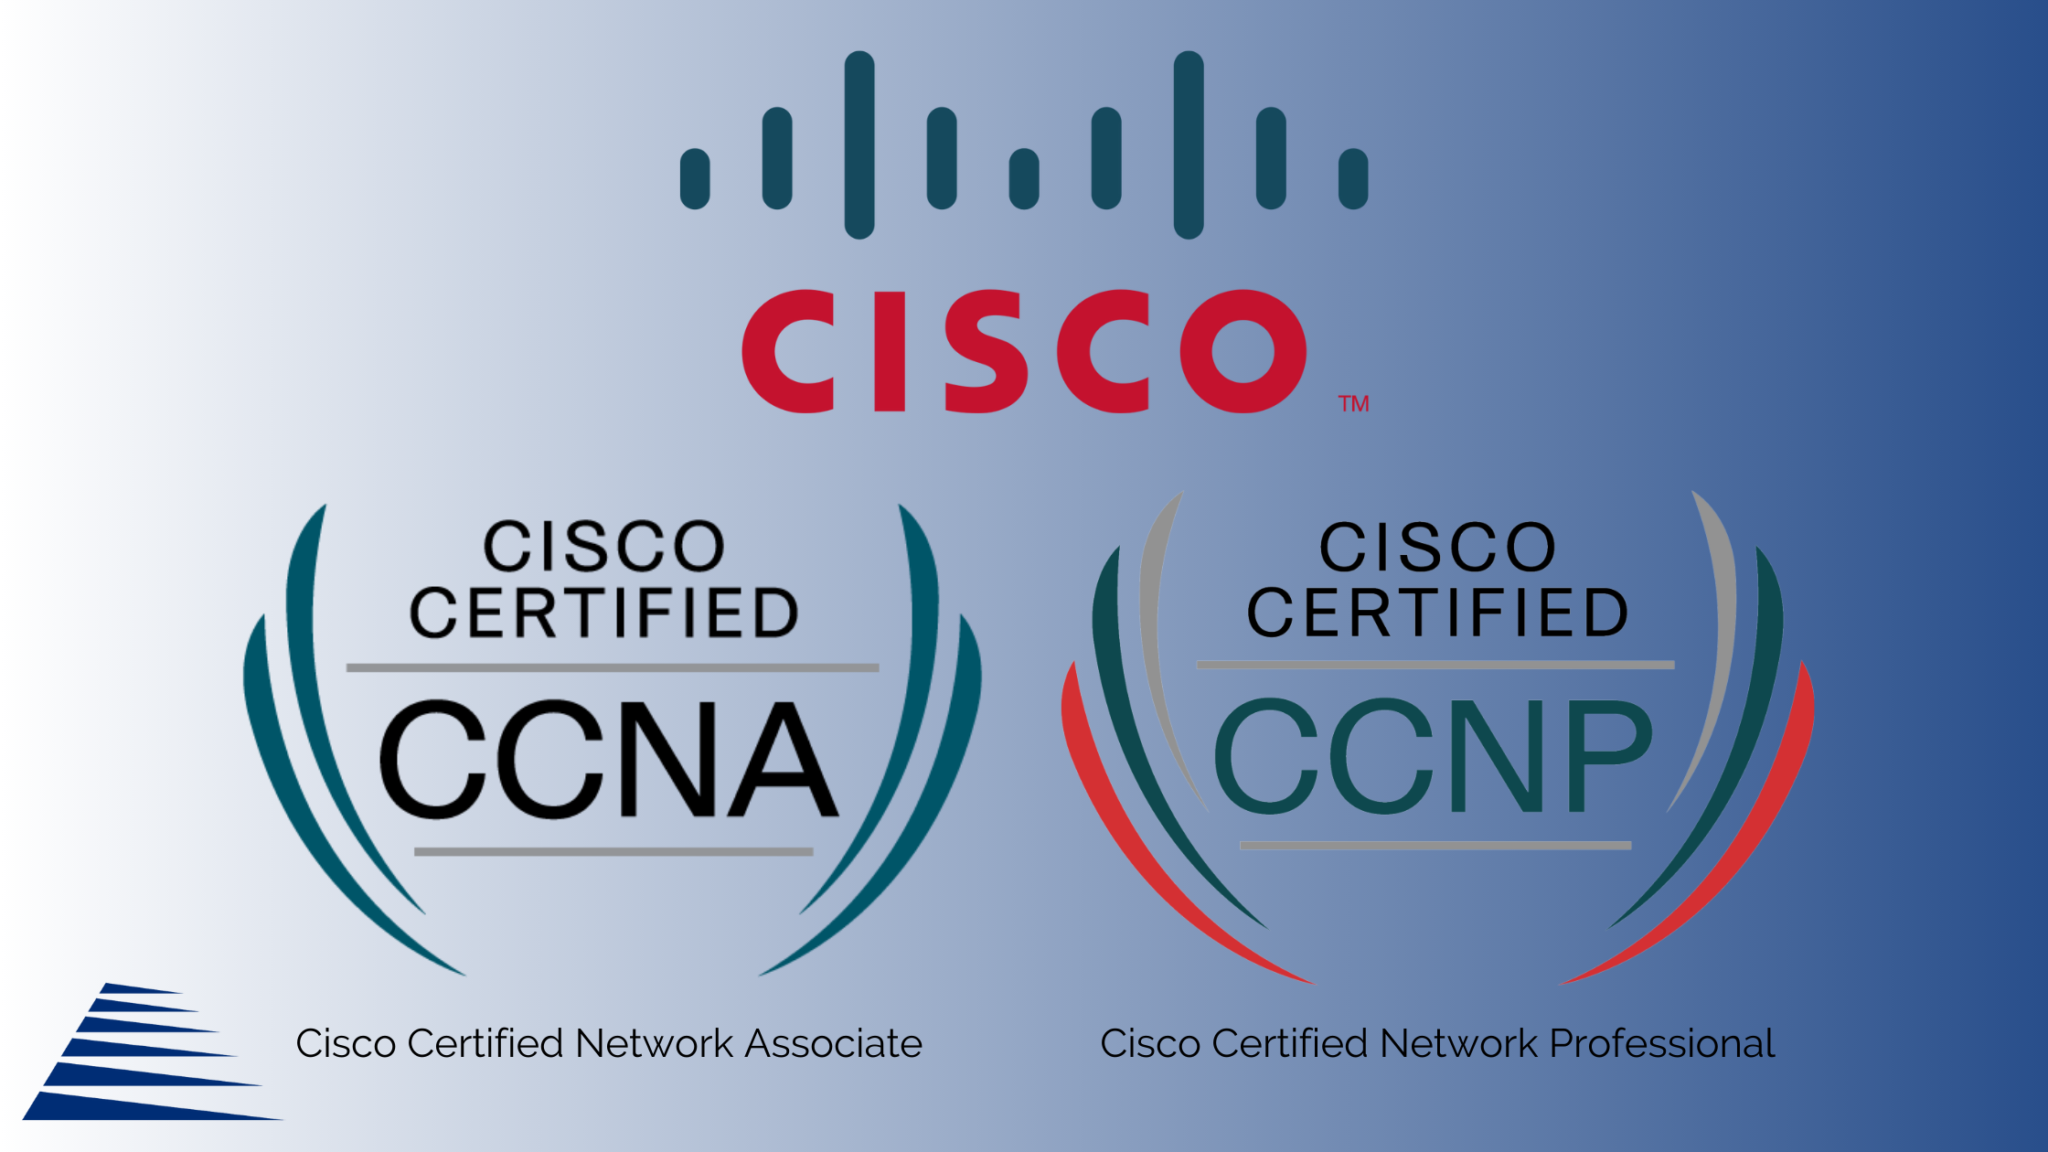 Cisco IT Certification, CCNA and CCNP logos